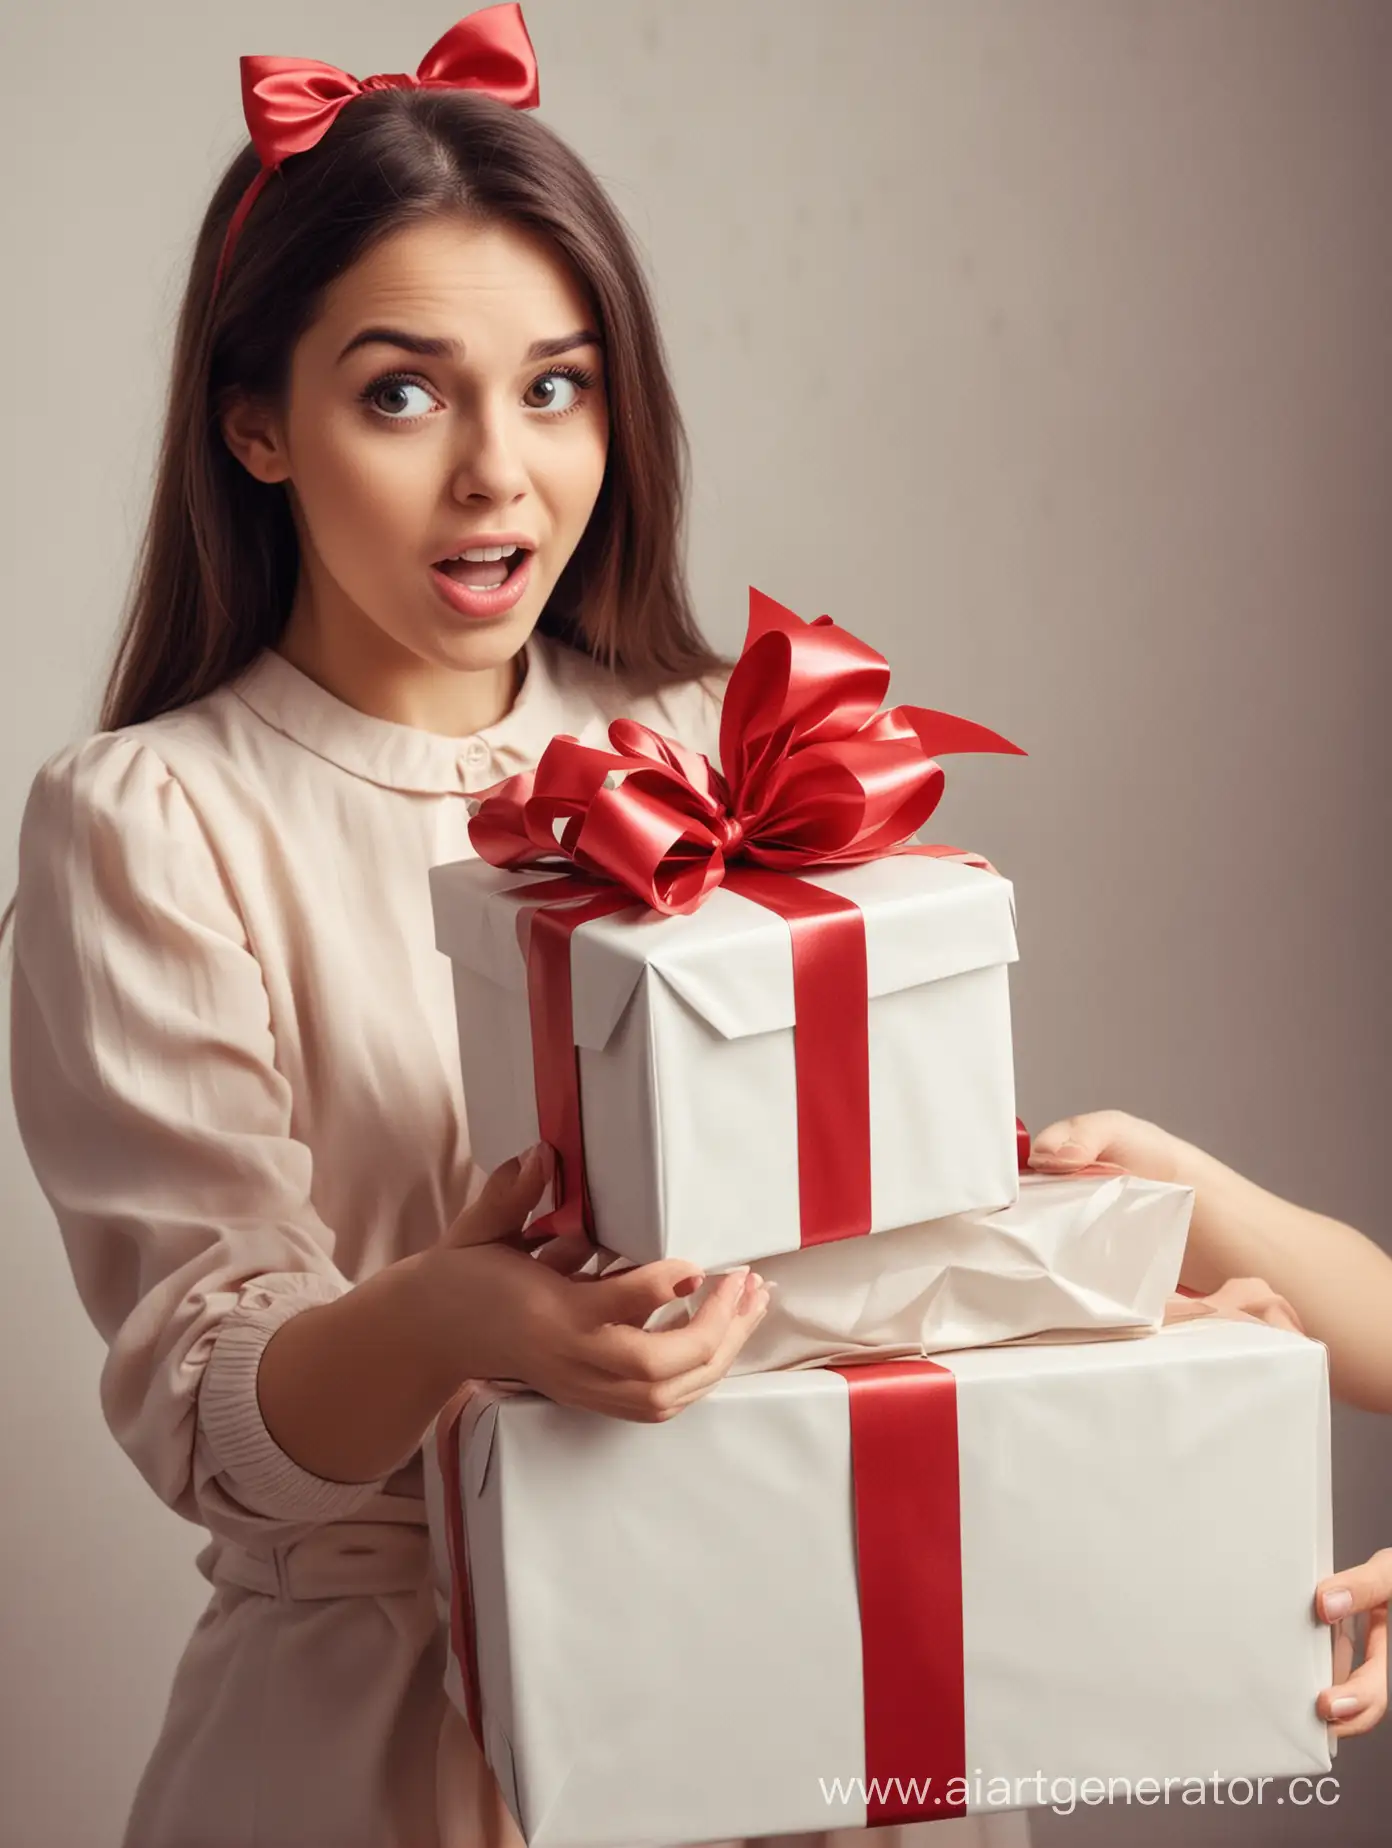 Surprise-Gift-Delivery-to-Delighted-Girl